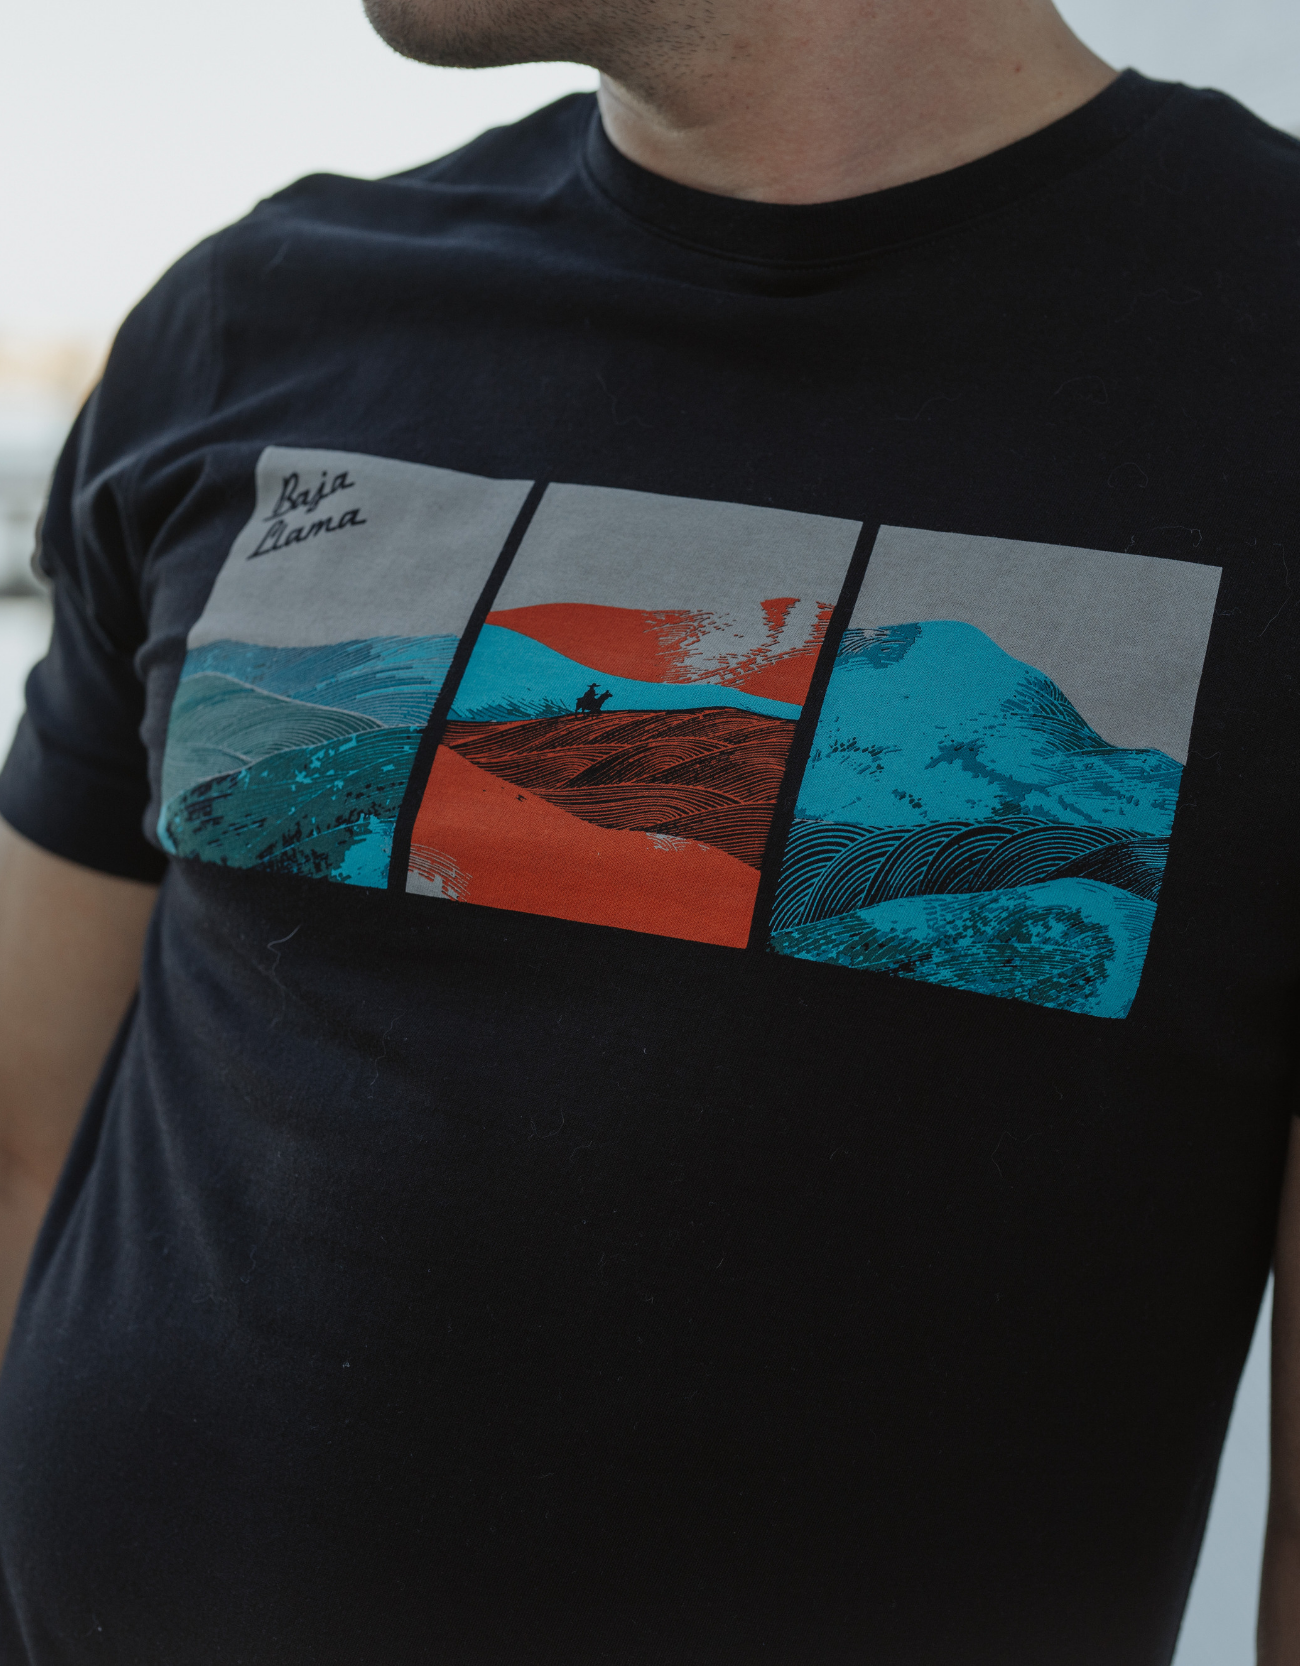 MOUNTAINS OF MADNESS - PRIMO GRAPHIC TEE by Bajallama